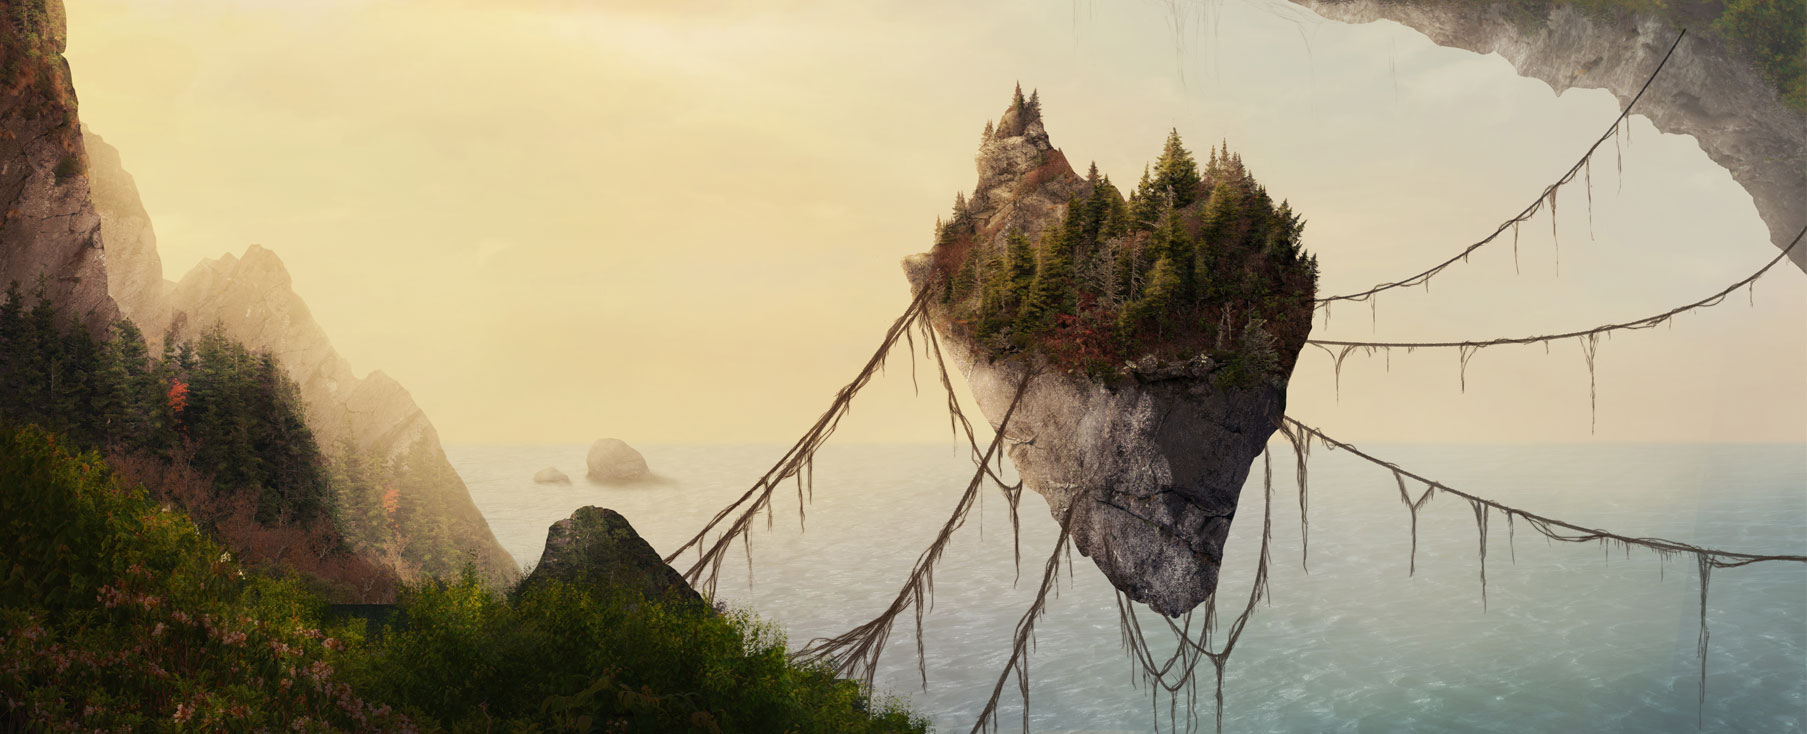 Overlooking an ocean, a fictional piece of land resembling an island appears to be levitating. Long, ropy vines connect the floating island to other pieces of the mainland. On the floating island, we see a small mountain, a forest, and rocky terrain below.